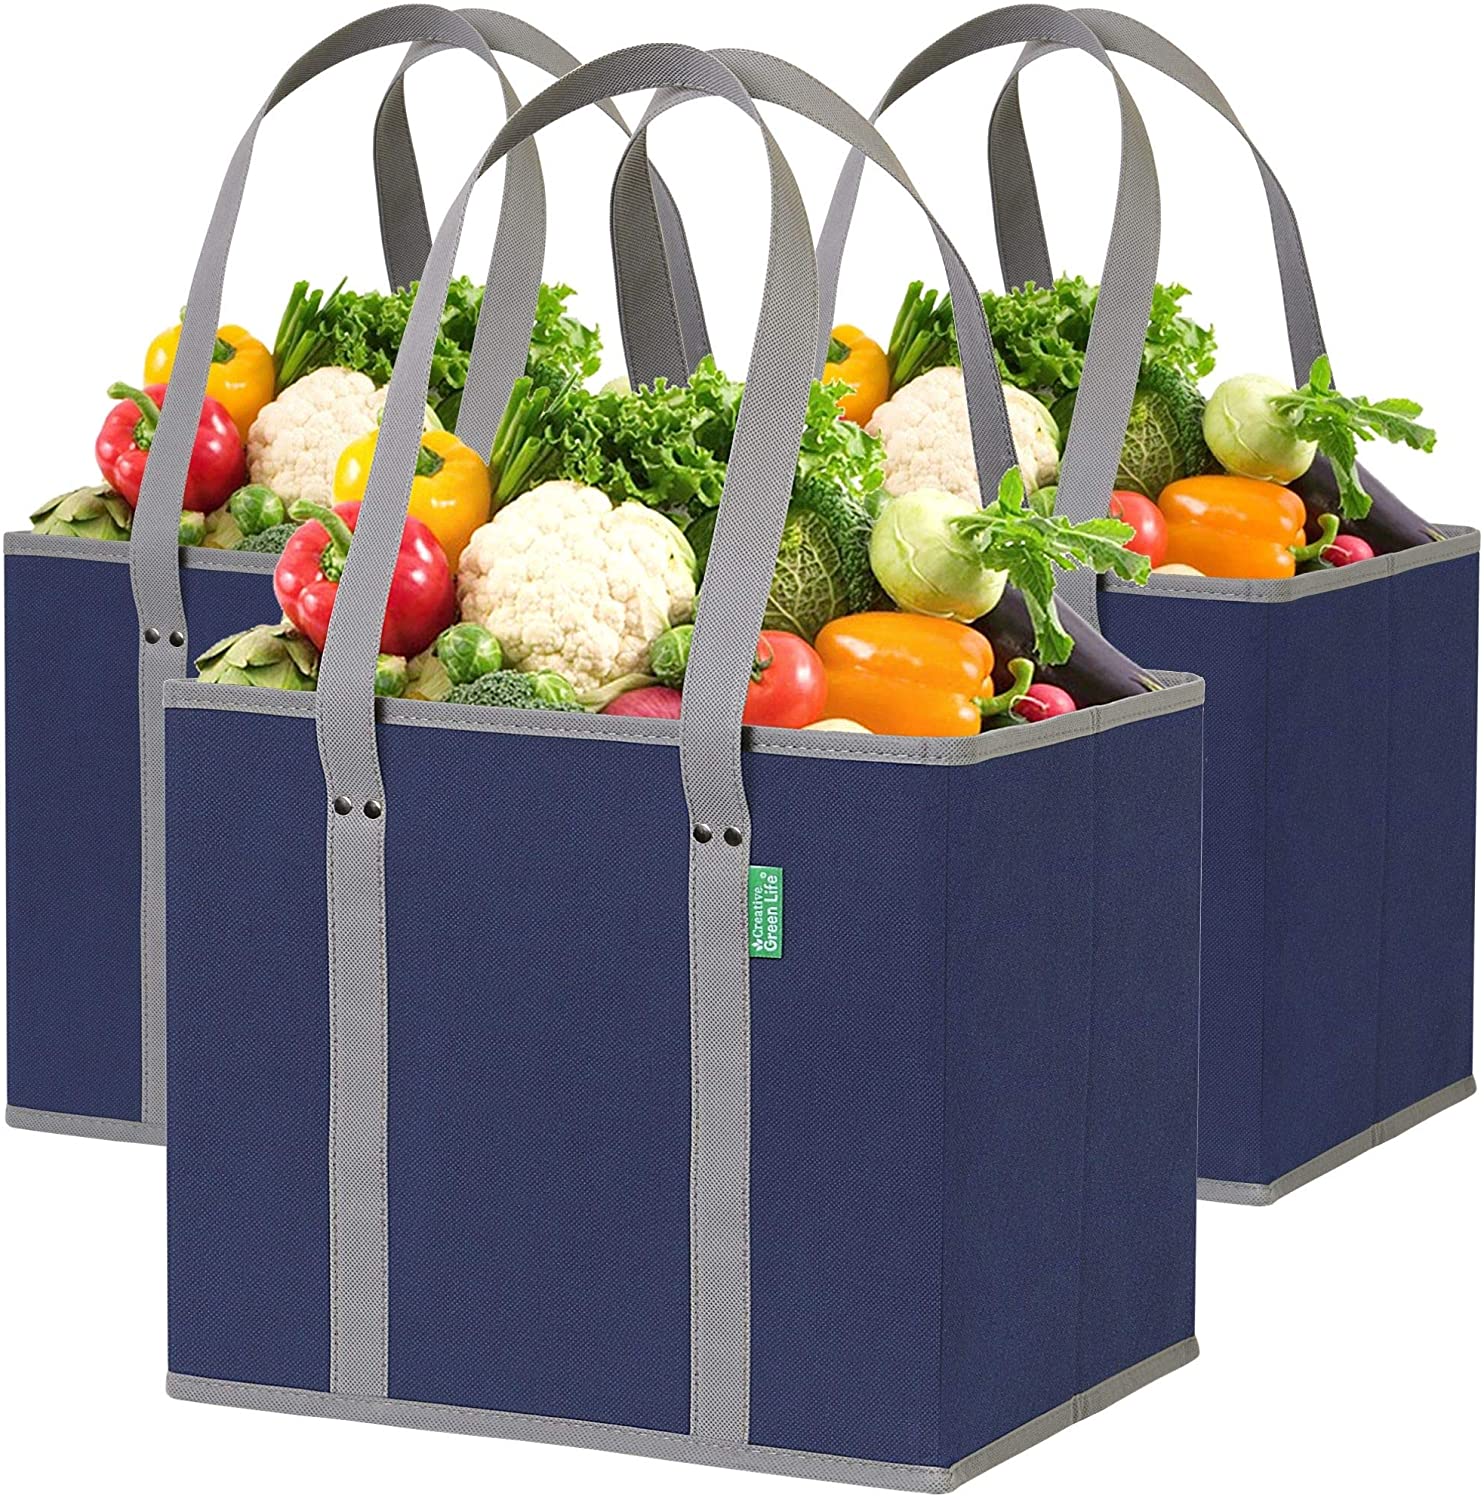 Canvas Grocery Bags Reusable Washable Organic Cotton Shopping Bags With  Handles 3 Pack With 3 Produce Bags 